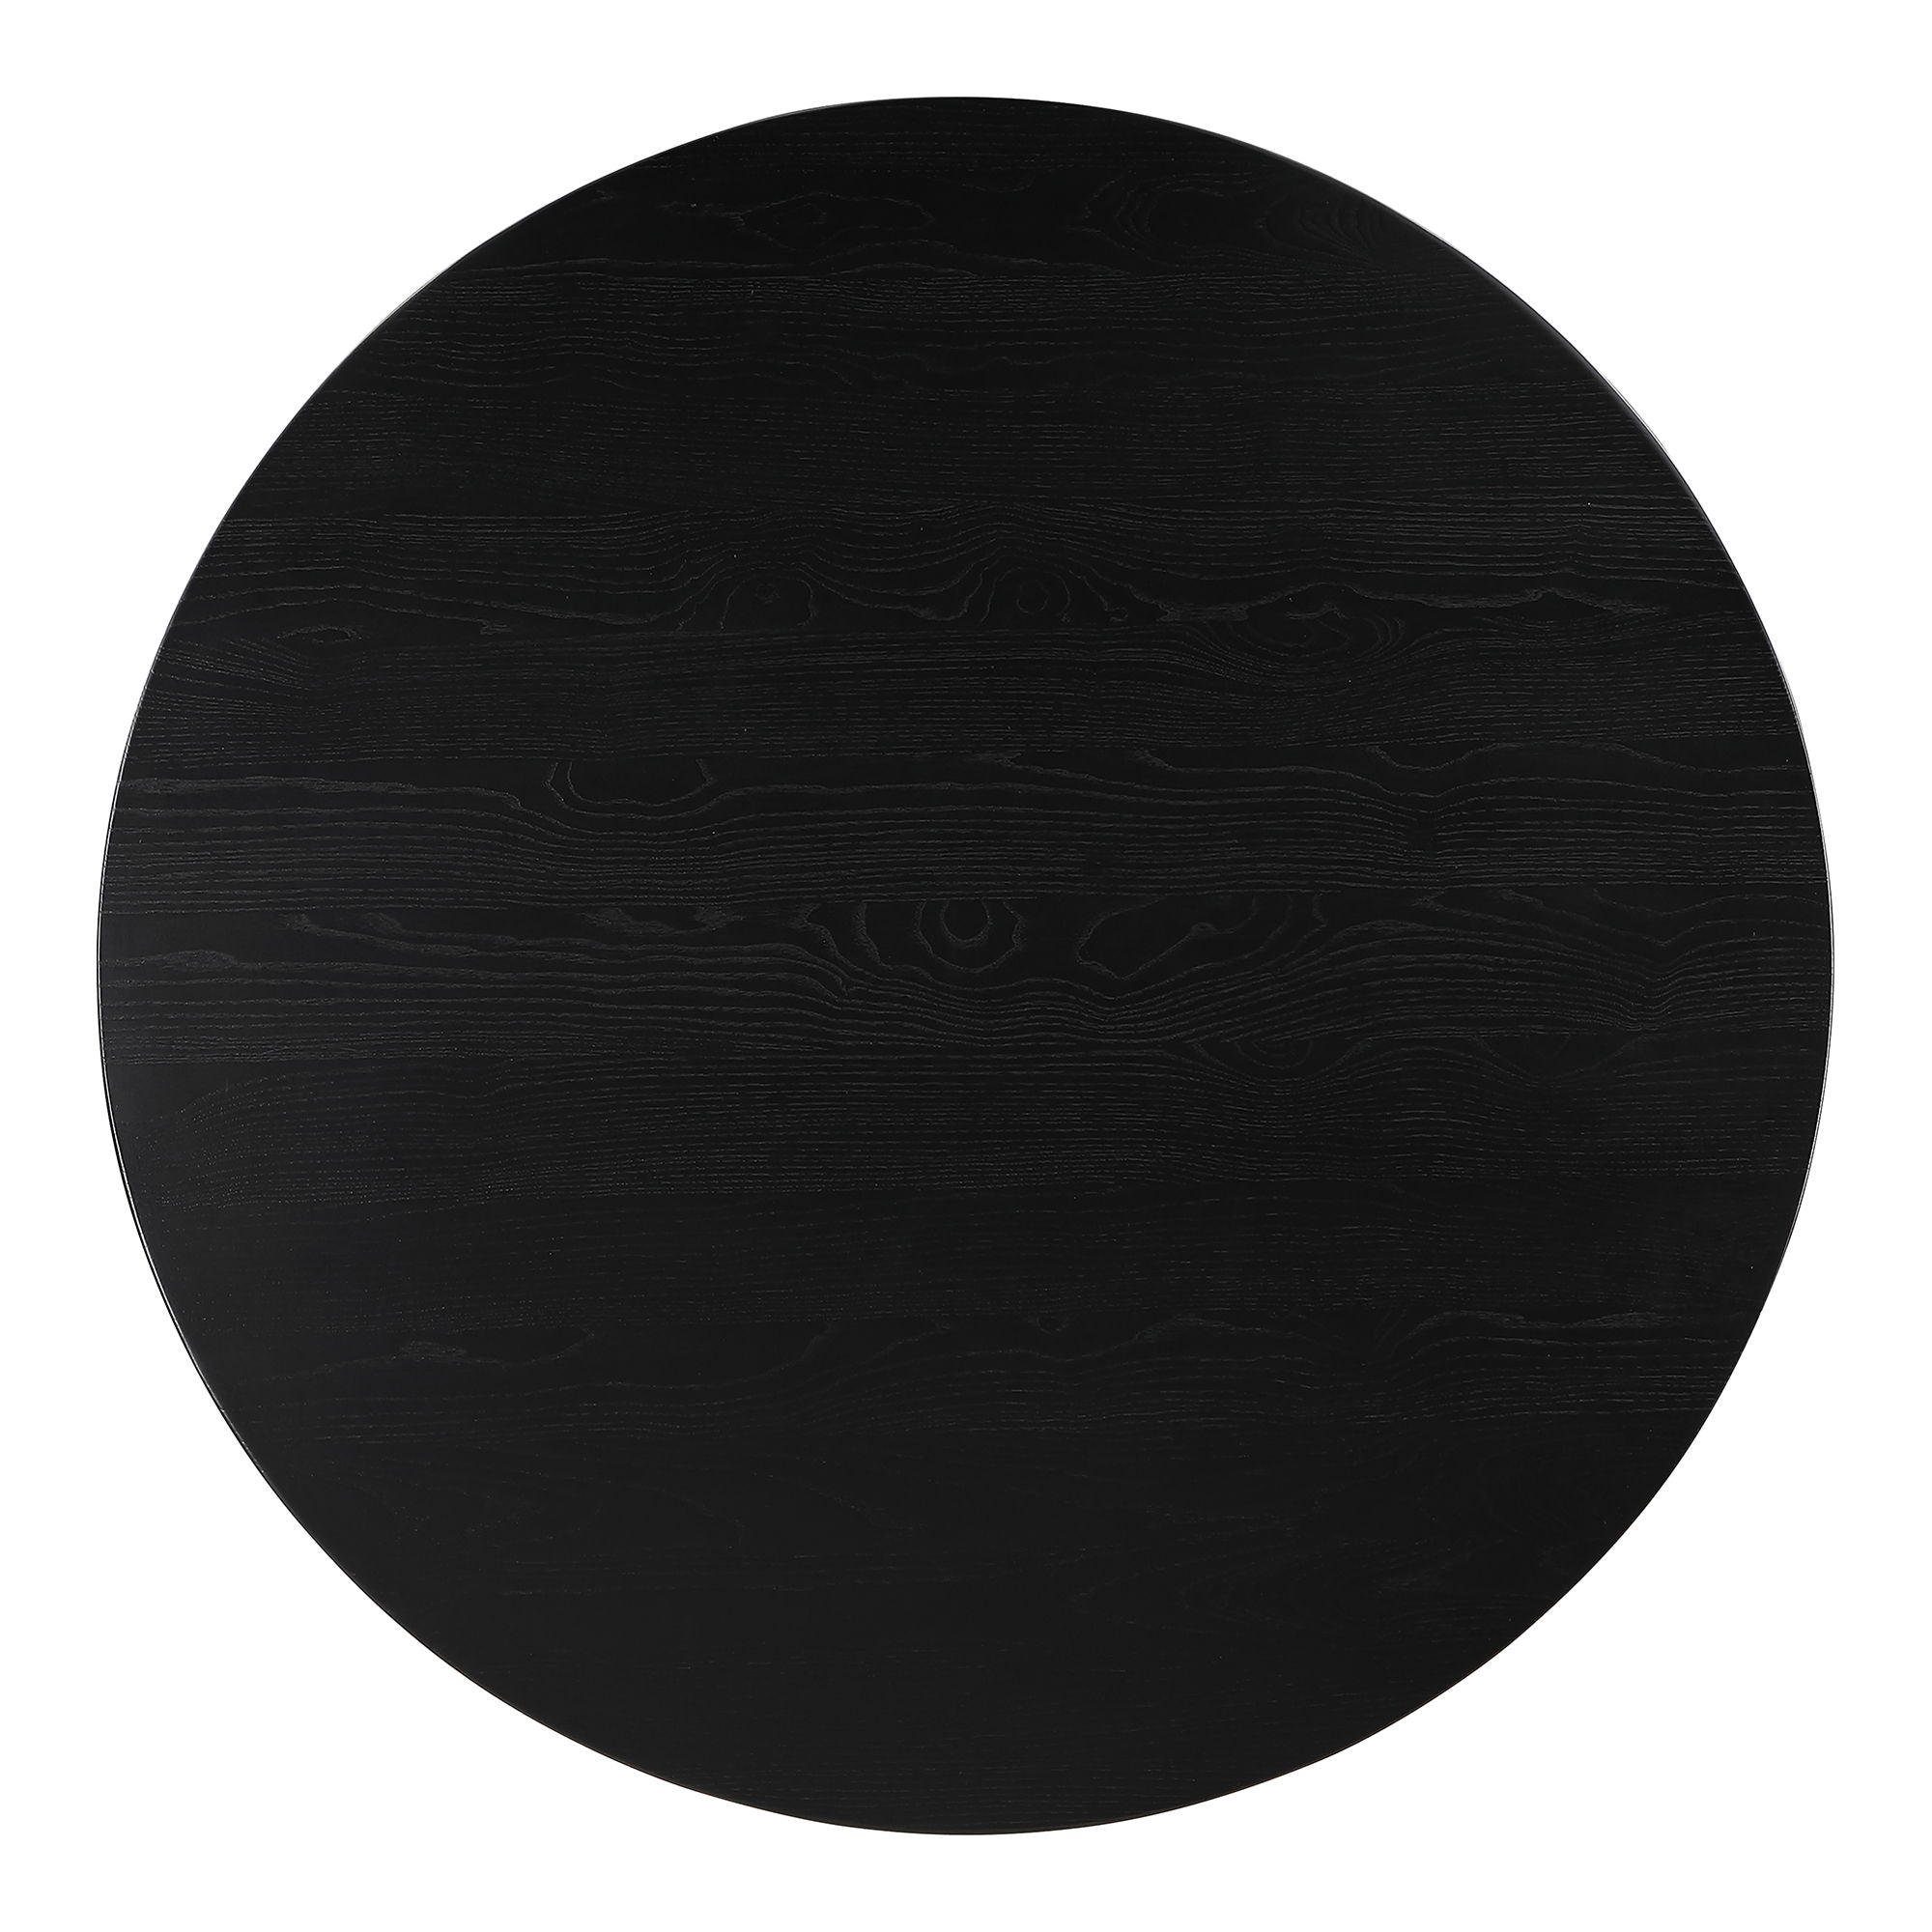 Silas - Round Dining Table - Black Ash